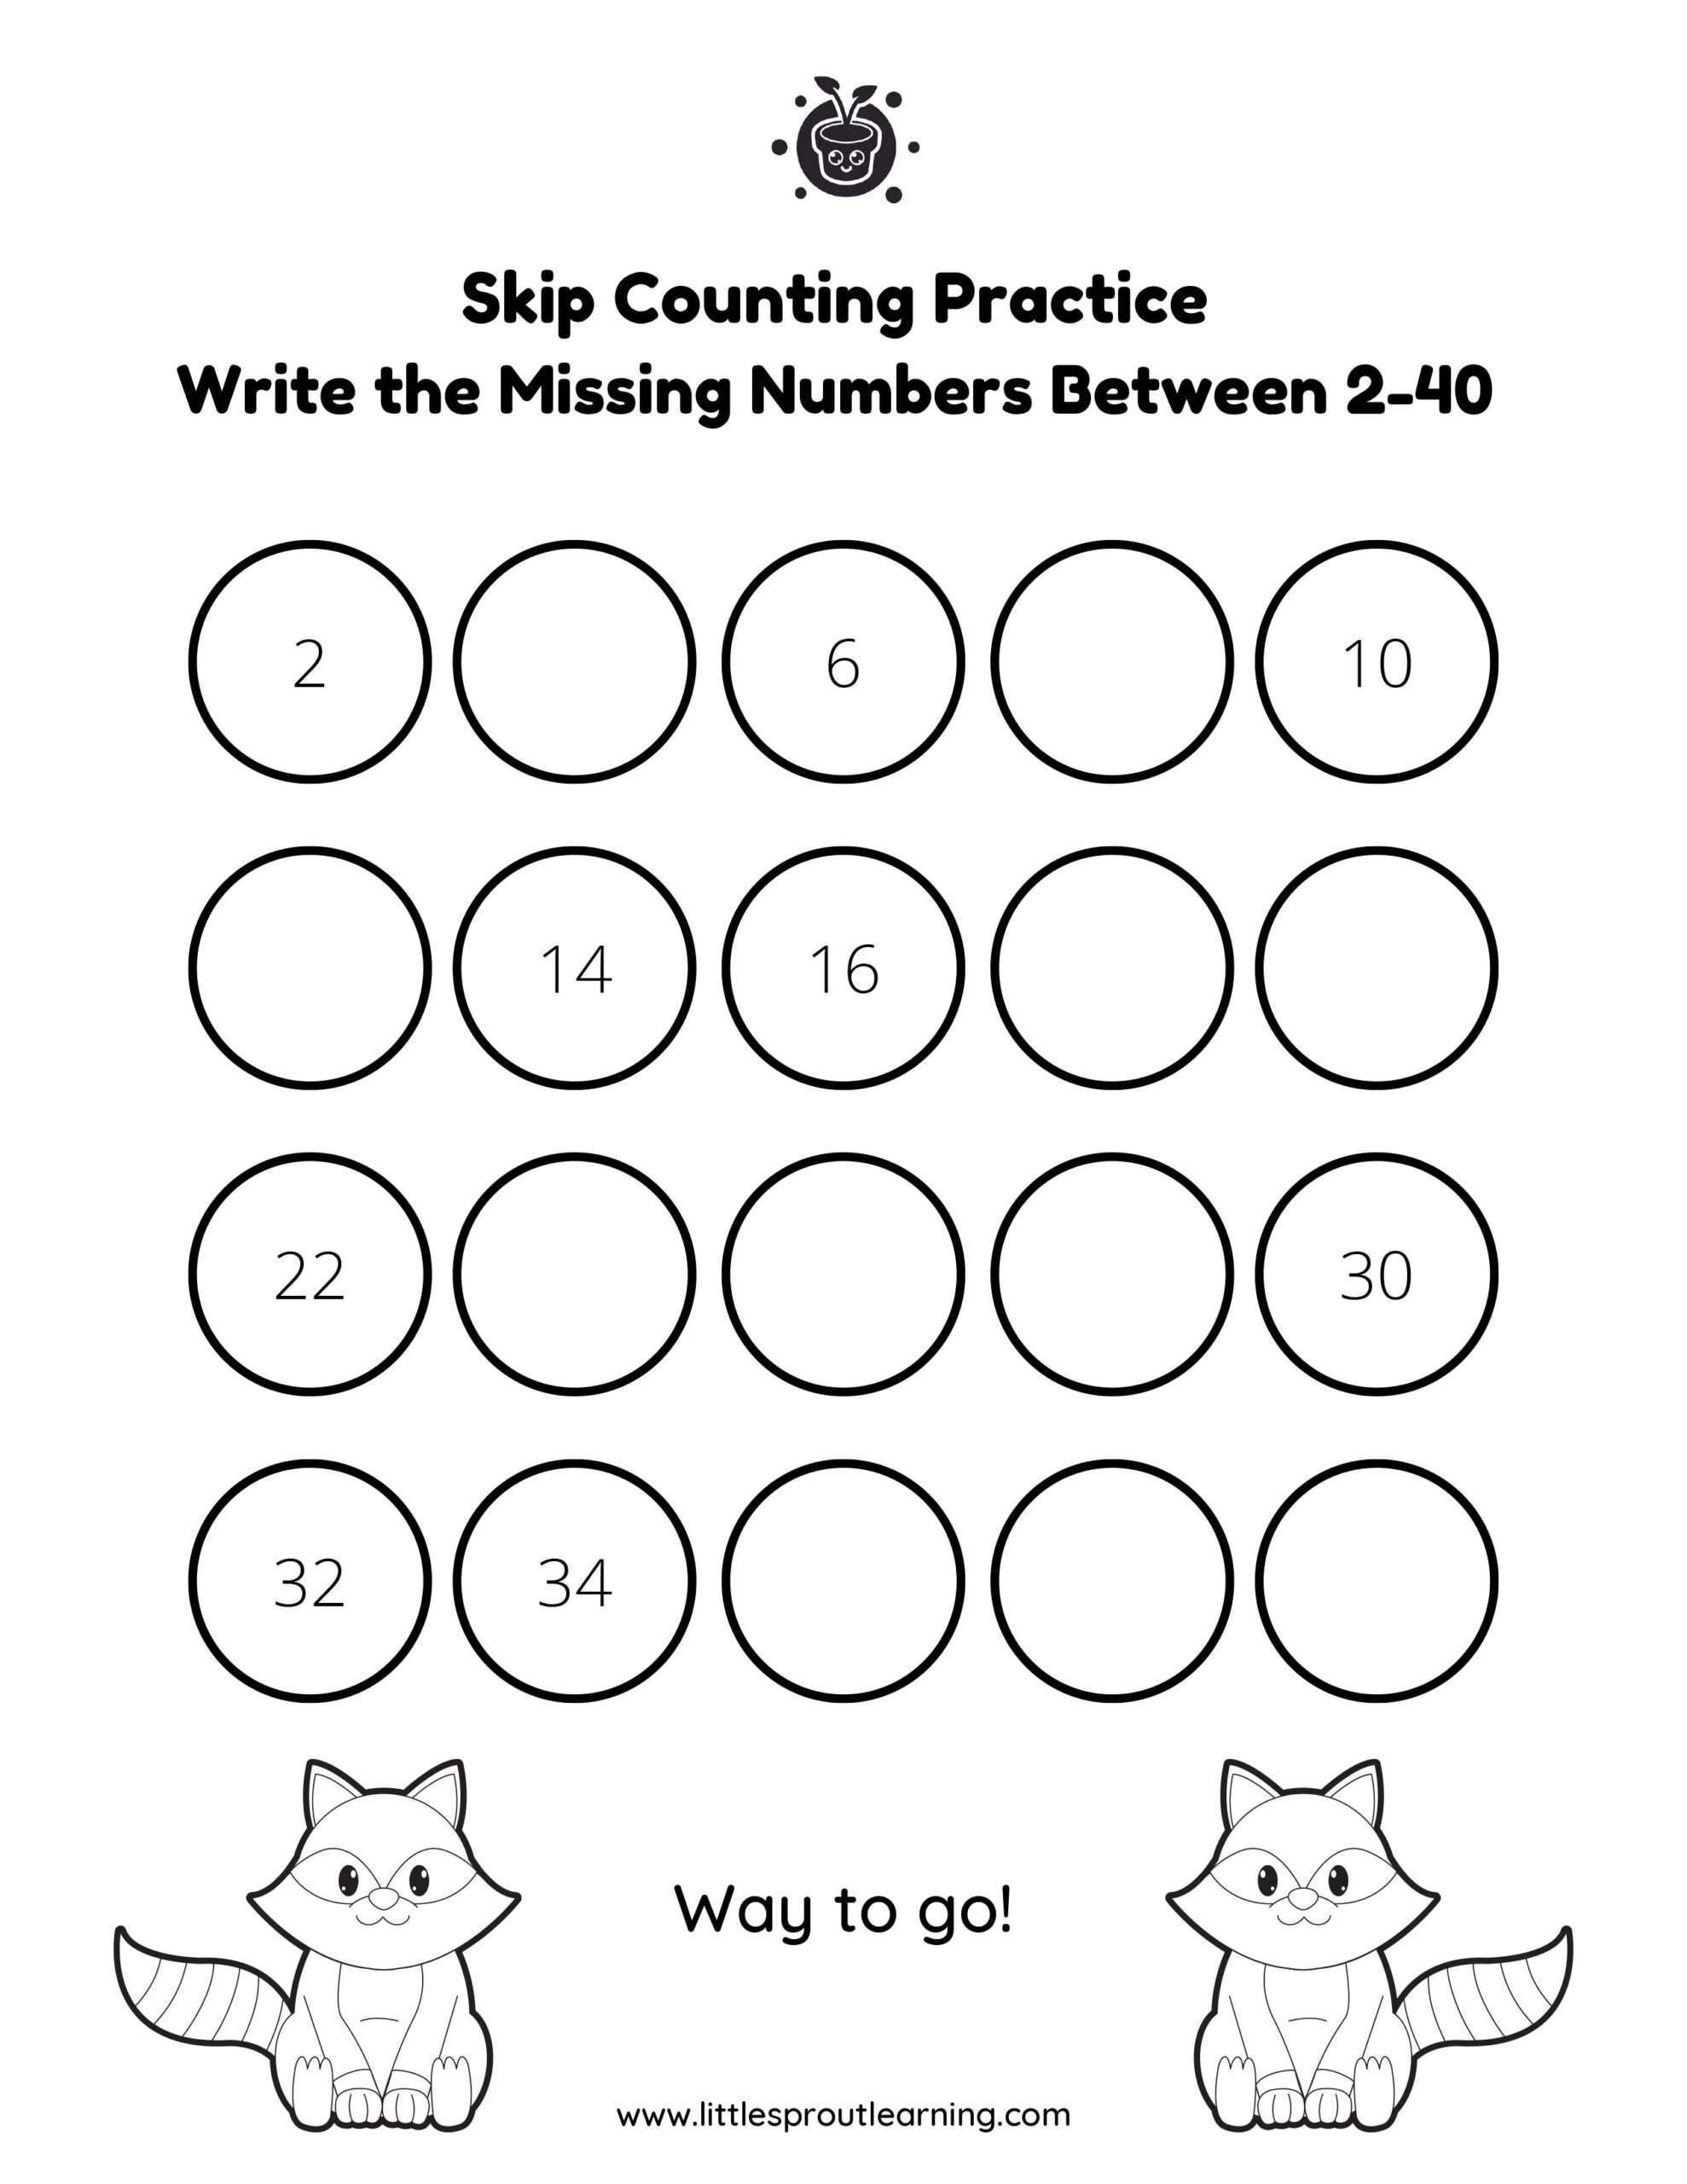 Skip Counting by 2